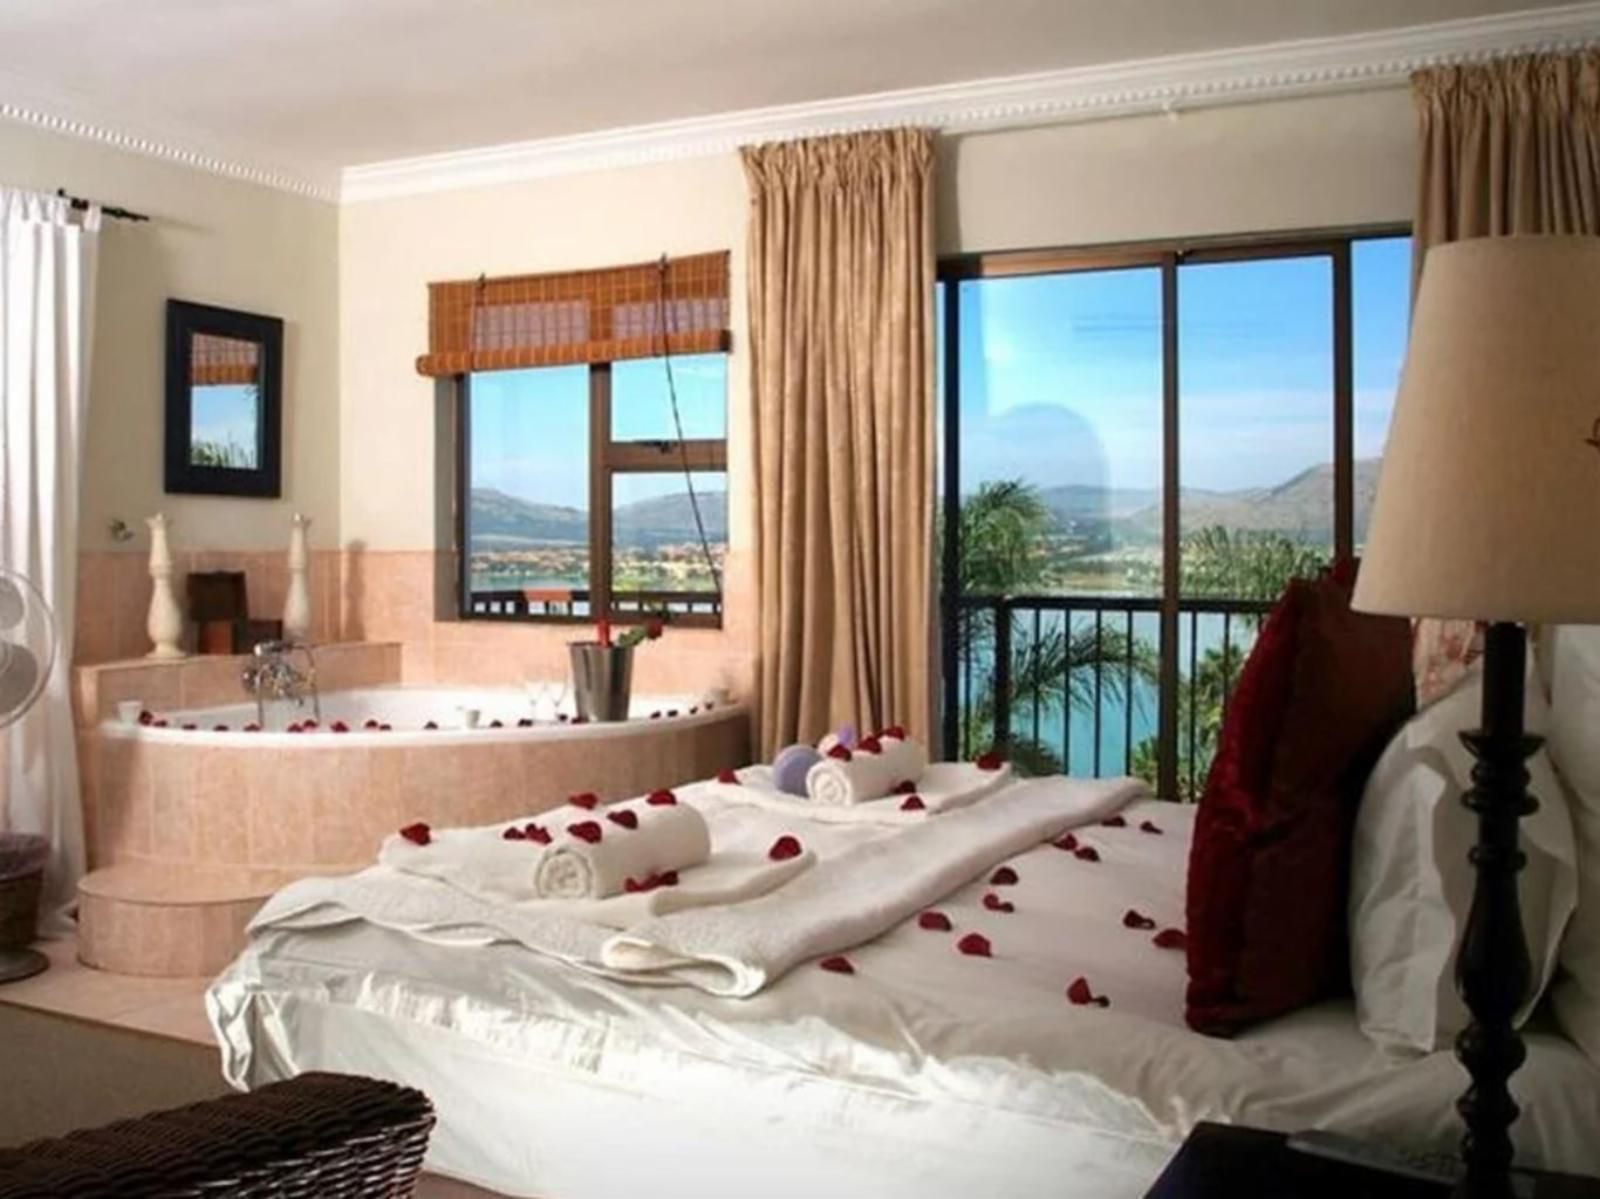 La Dolce Vita Guest House Kosmos Hartbeespoort North West Province South Africa Bedroom